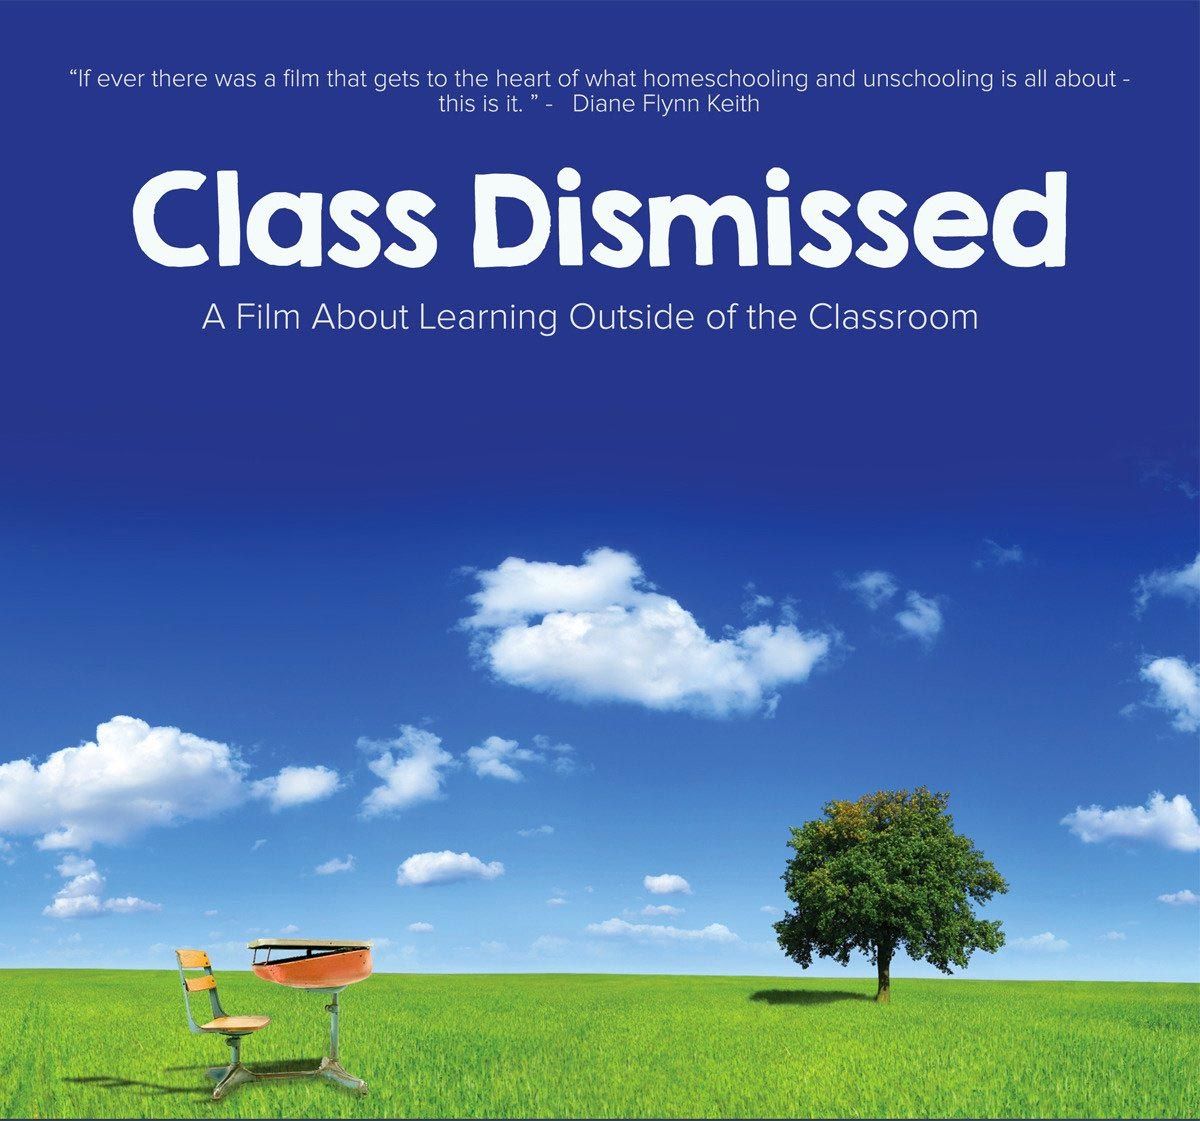 Poster for the film "Class Dismissed," with a school desk out in the middle of a grassy field.